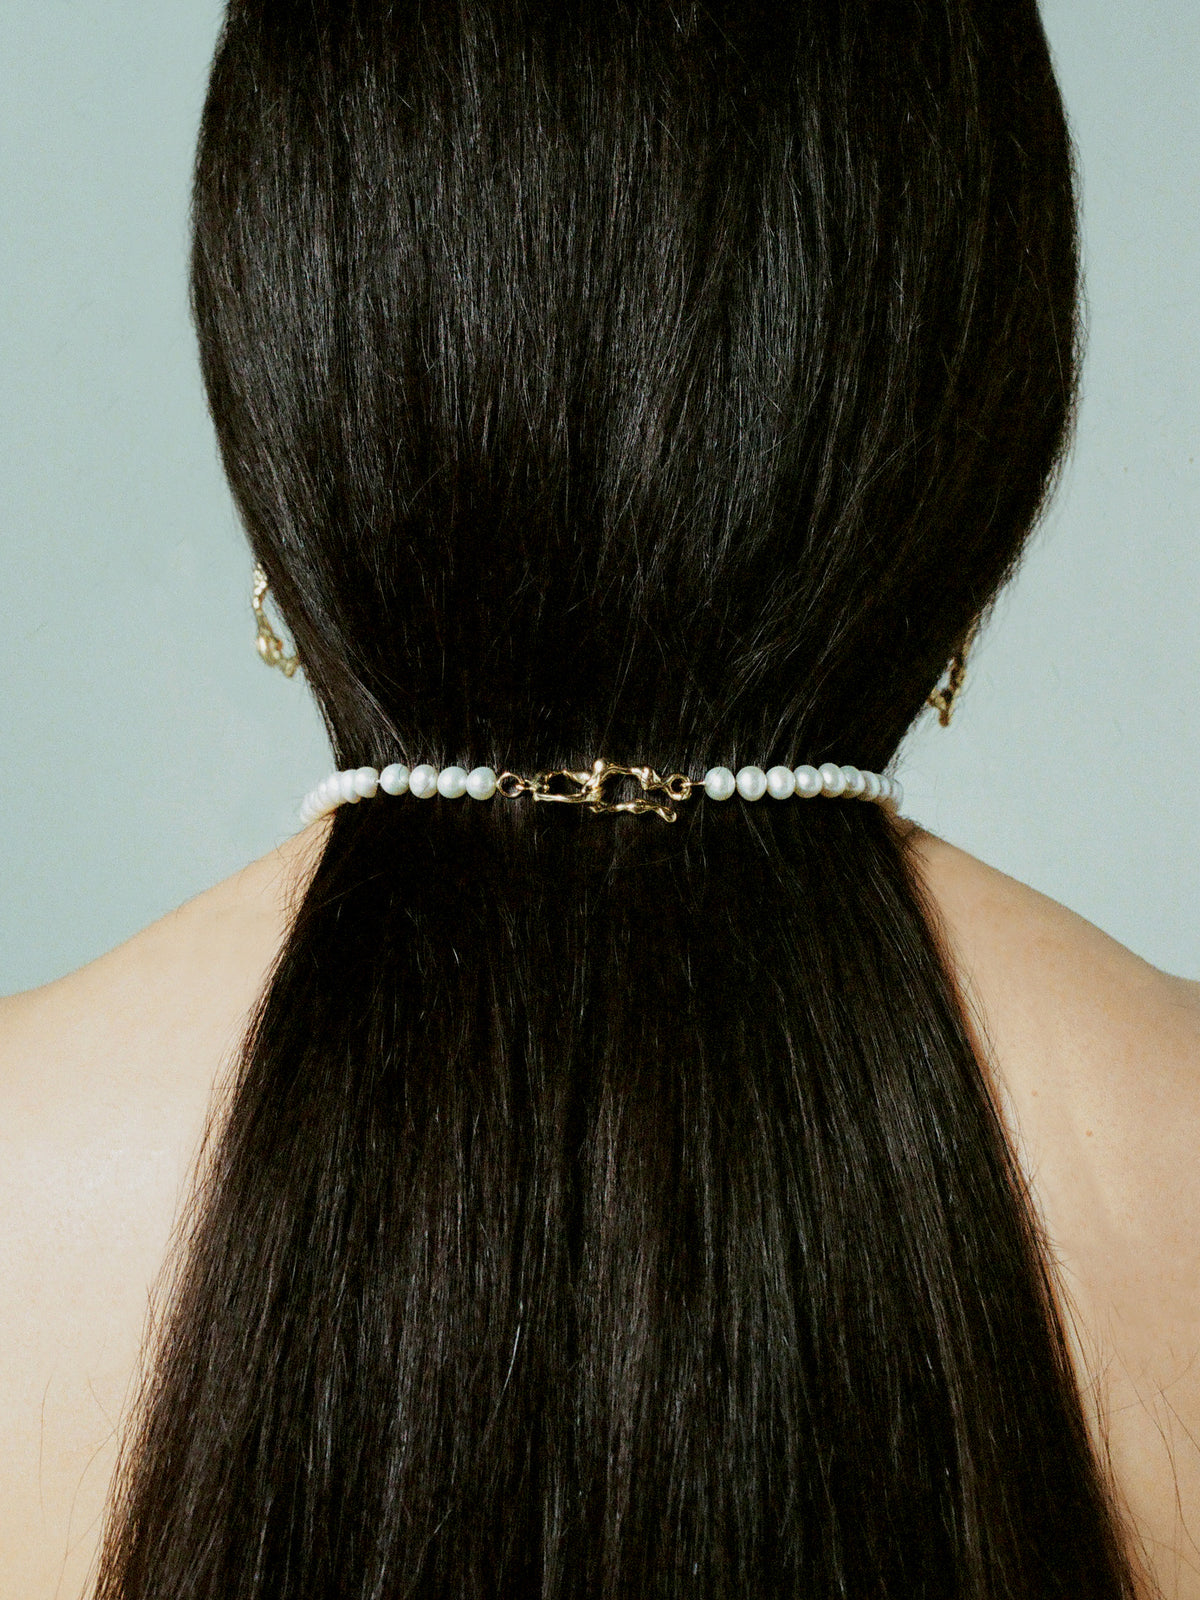 Hand-carved hook-eye closure on FARIS PATTA Collar in gold-plated bronze, shown on model. 